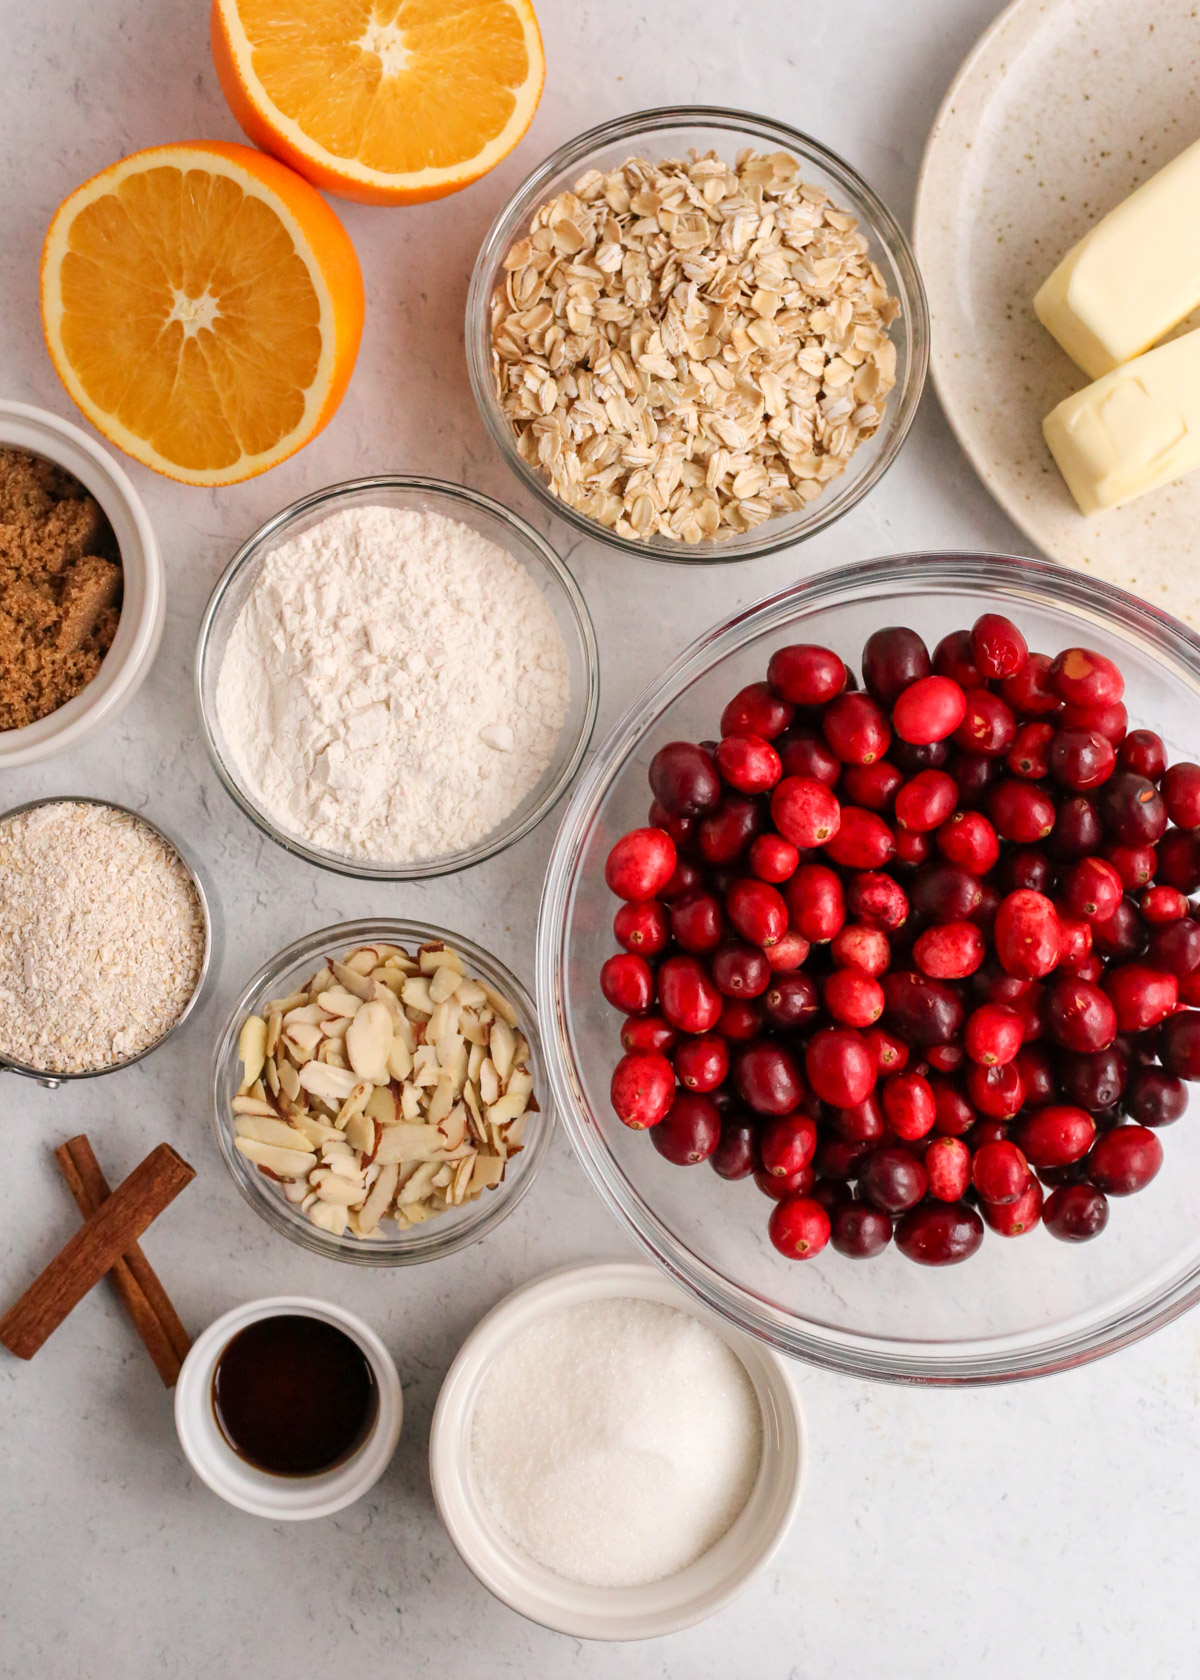 a collection of ingredients of an orange cranberry oat bar recipe, including fresh cranberries, sticks of butter, oats, flour, almonds, vanilla, brown and white sugar, and cinnamon sticks